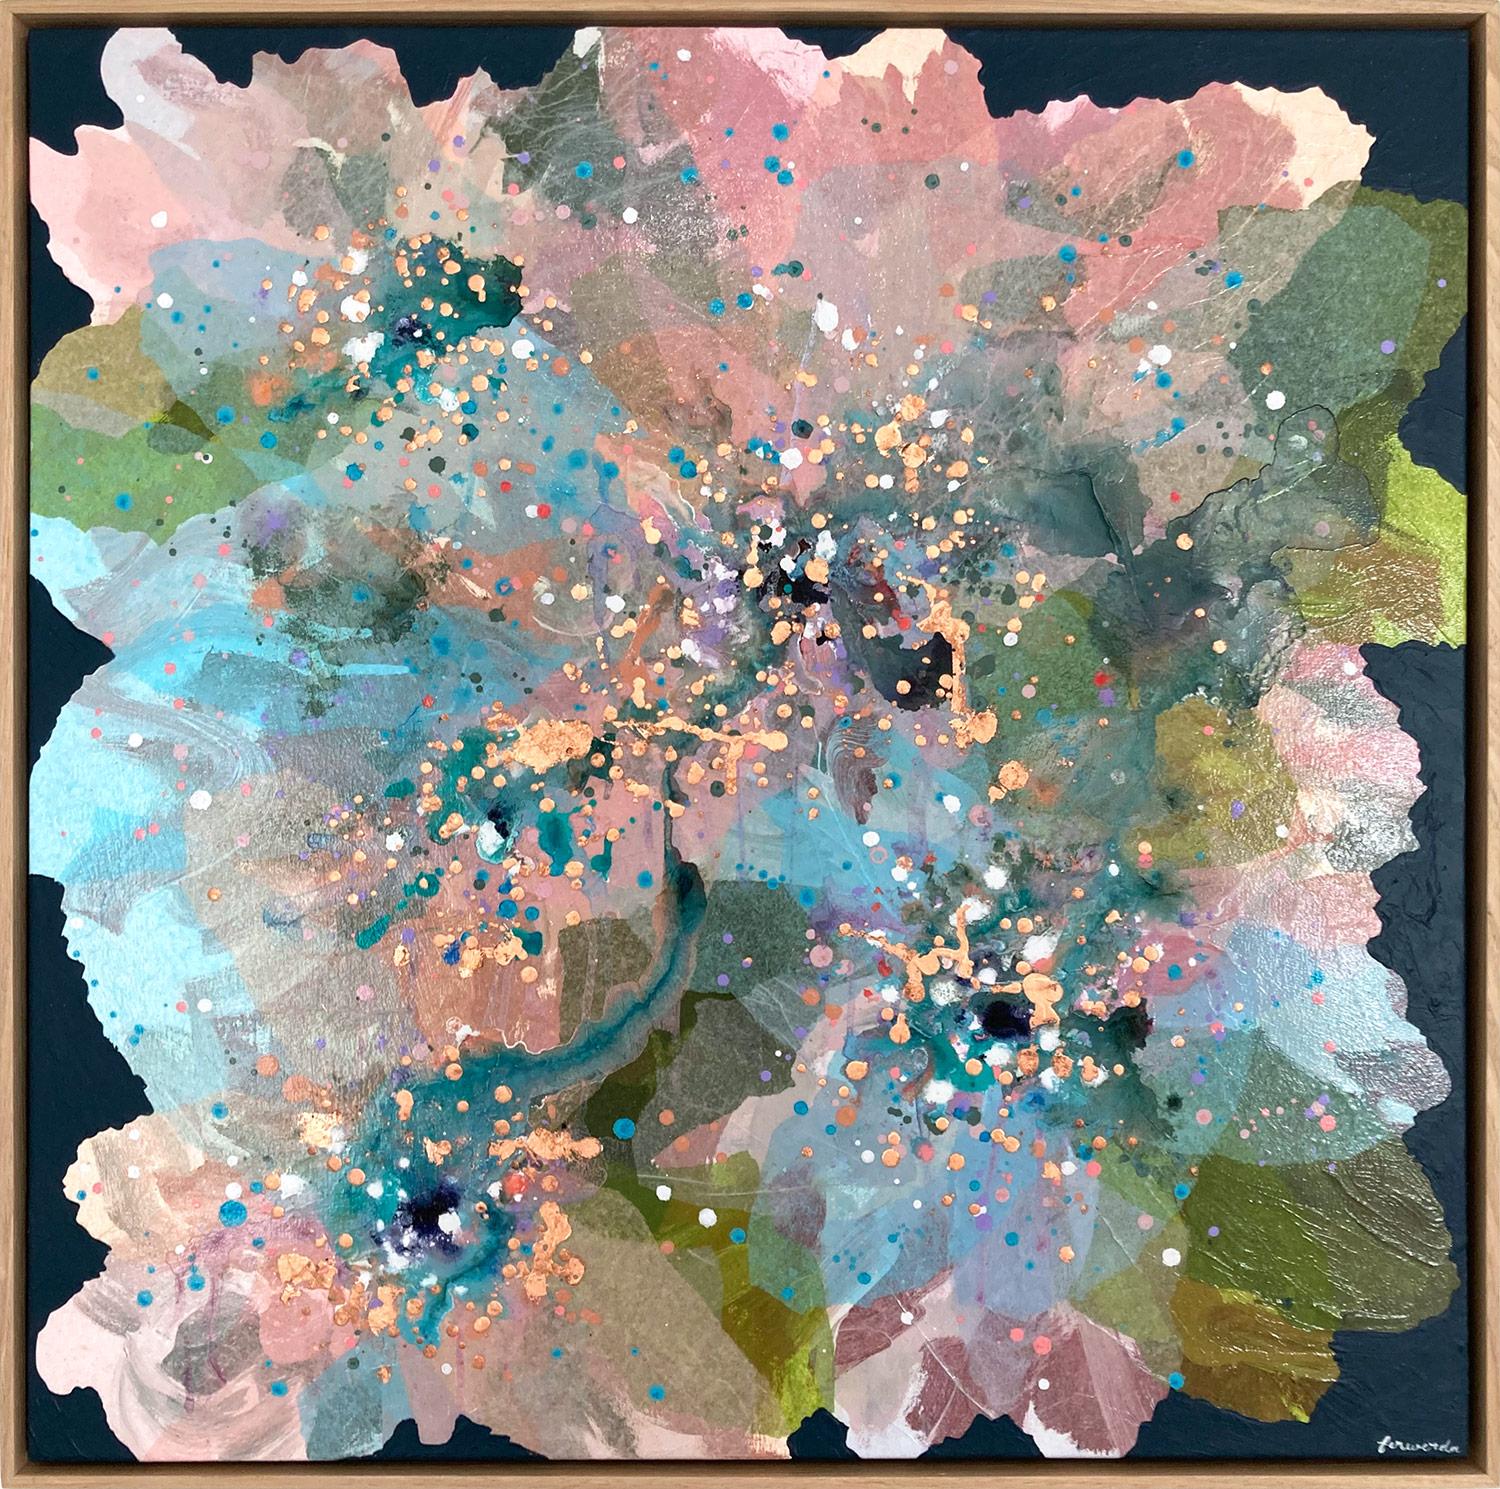 Antoinette Ferwerda Abstract Painting - "Jade Azalea" Contemporary Layered Mixed Media Floral Painting on Canvas